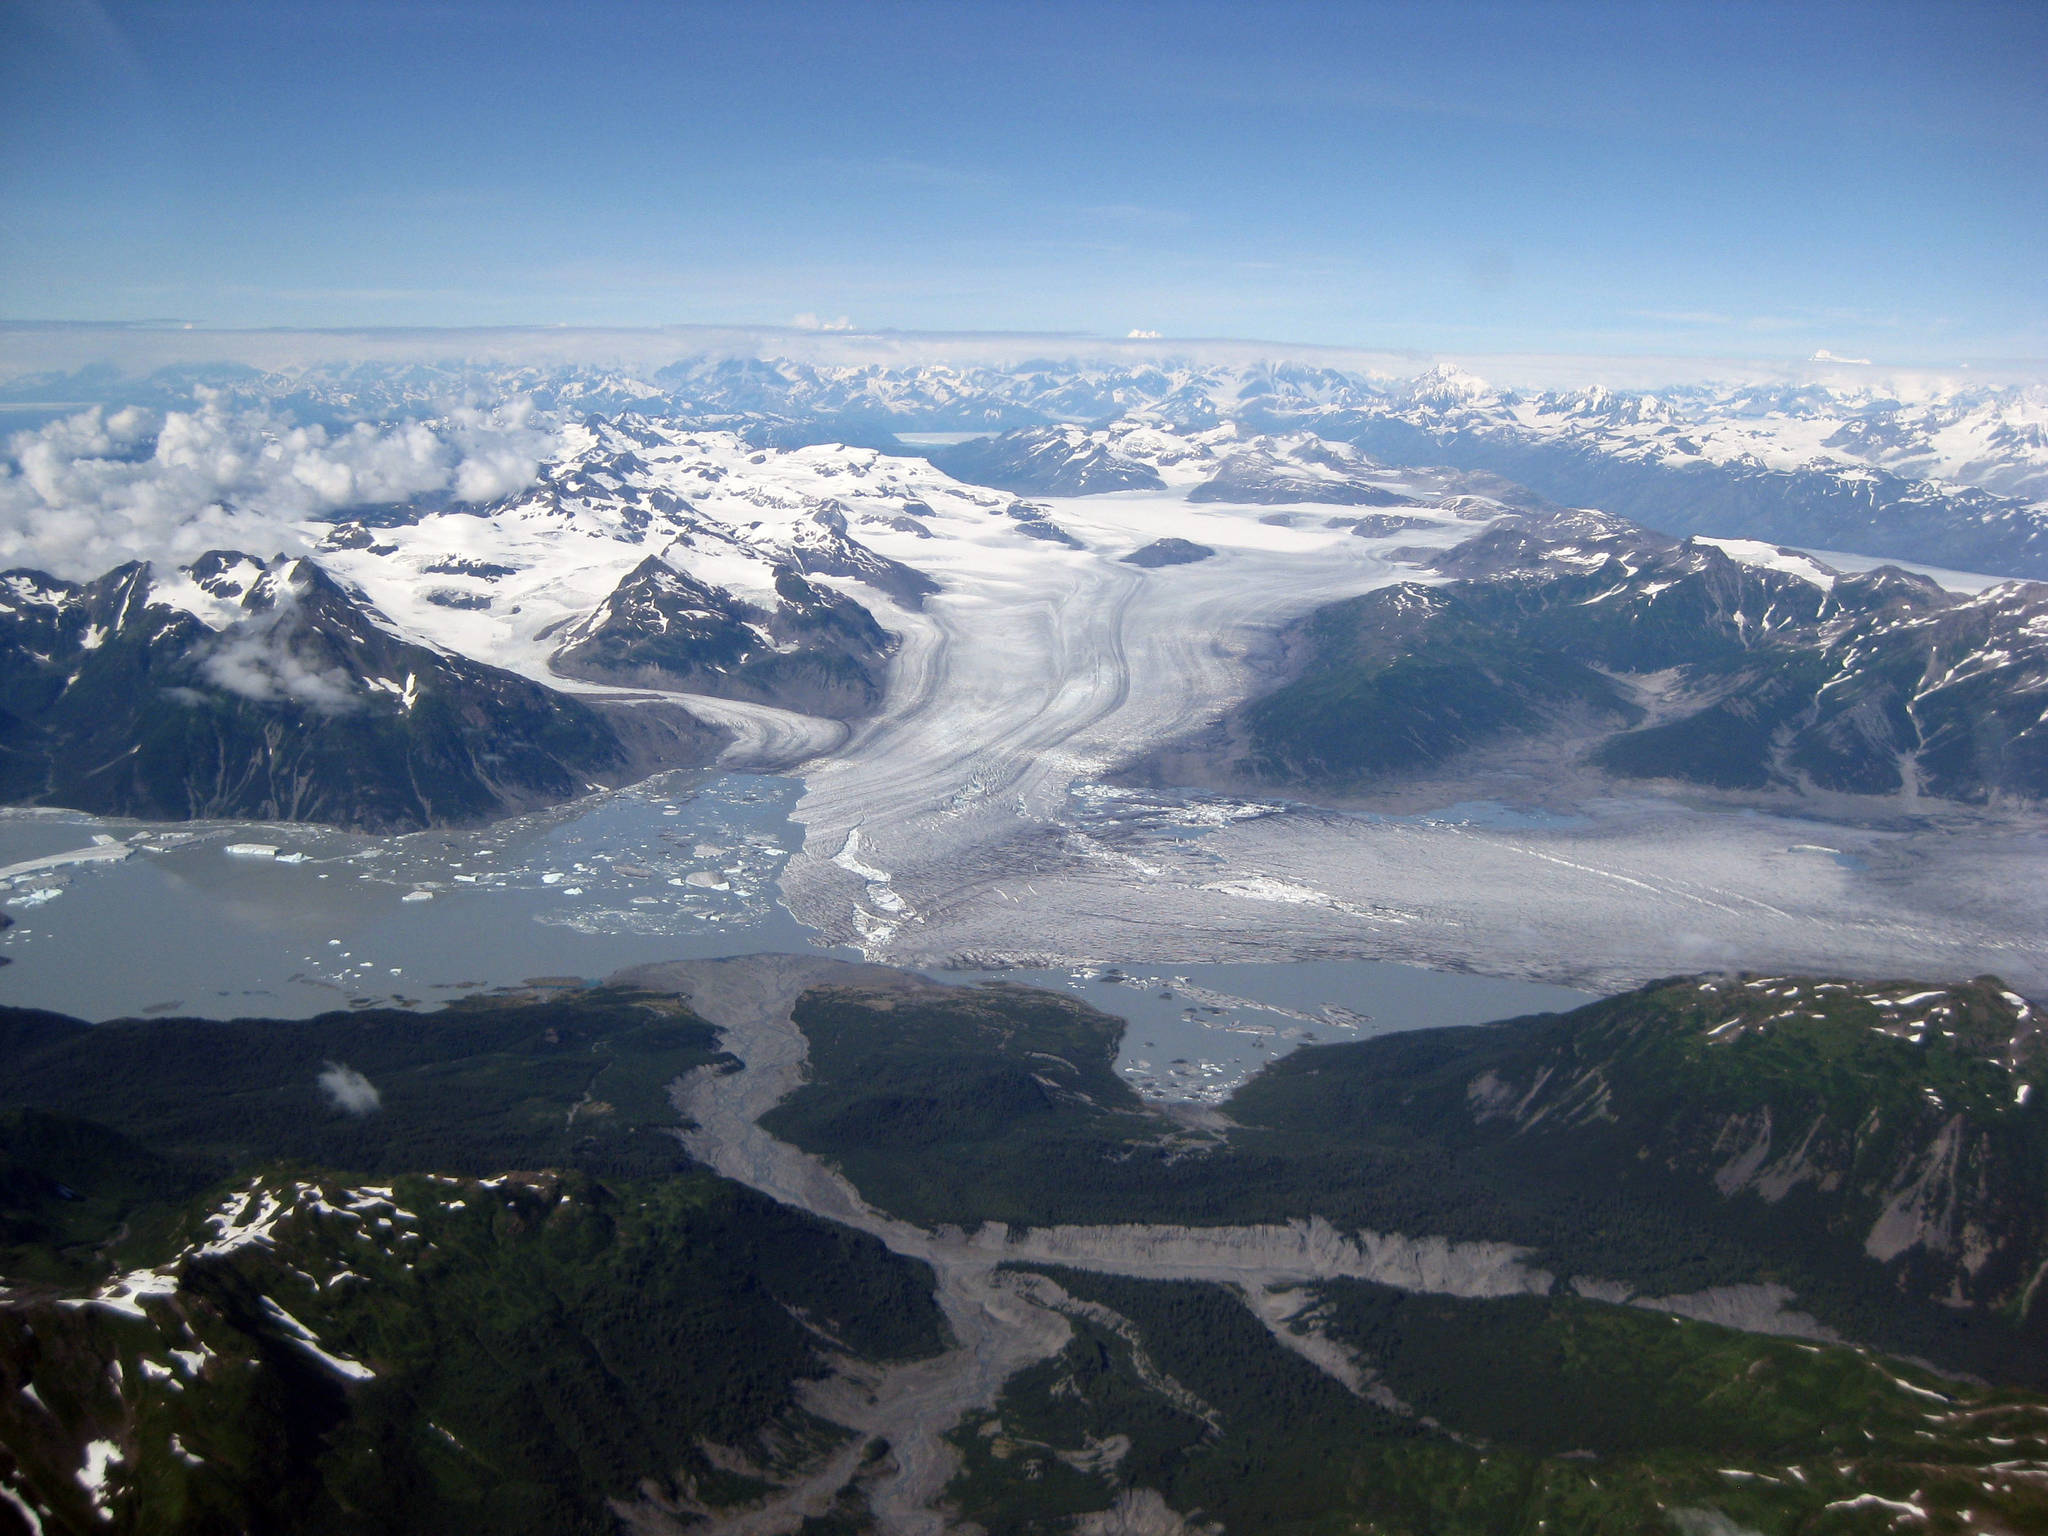 How many glaciers are there in Alaska?